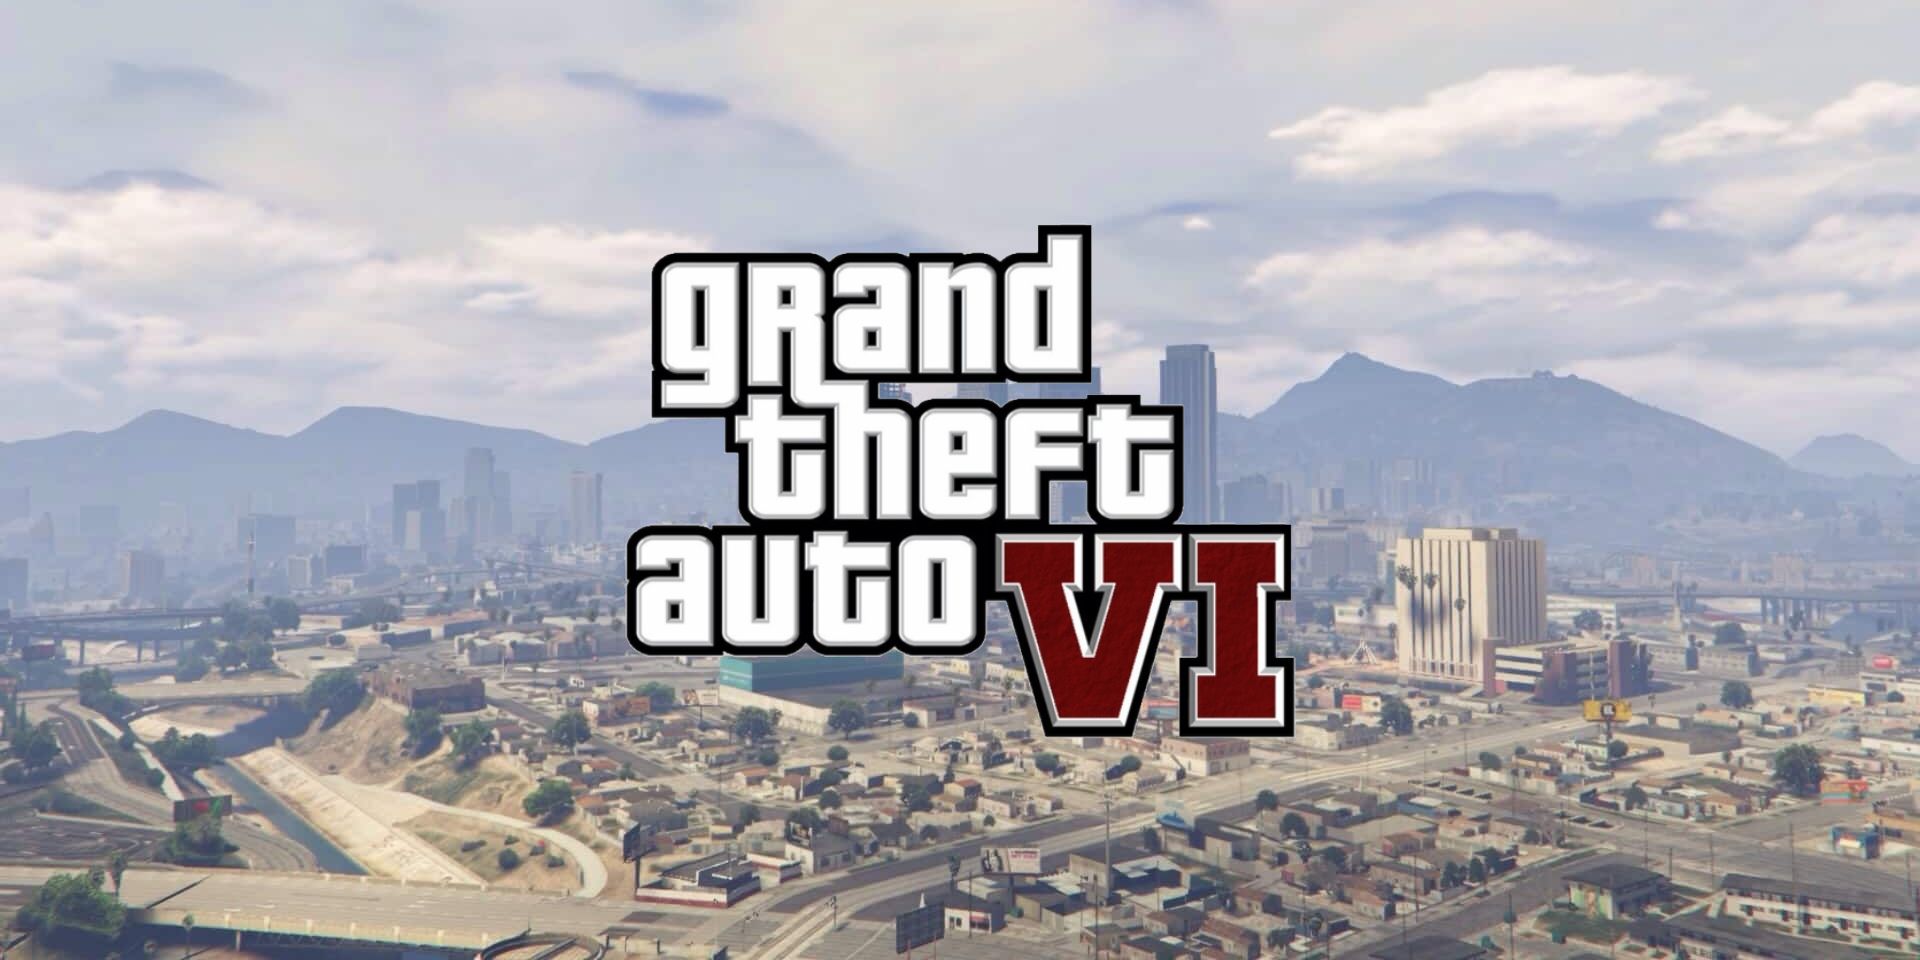 Will GTA 6 be able to live up to the massive expectations set by